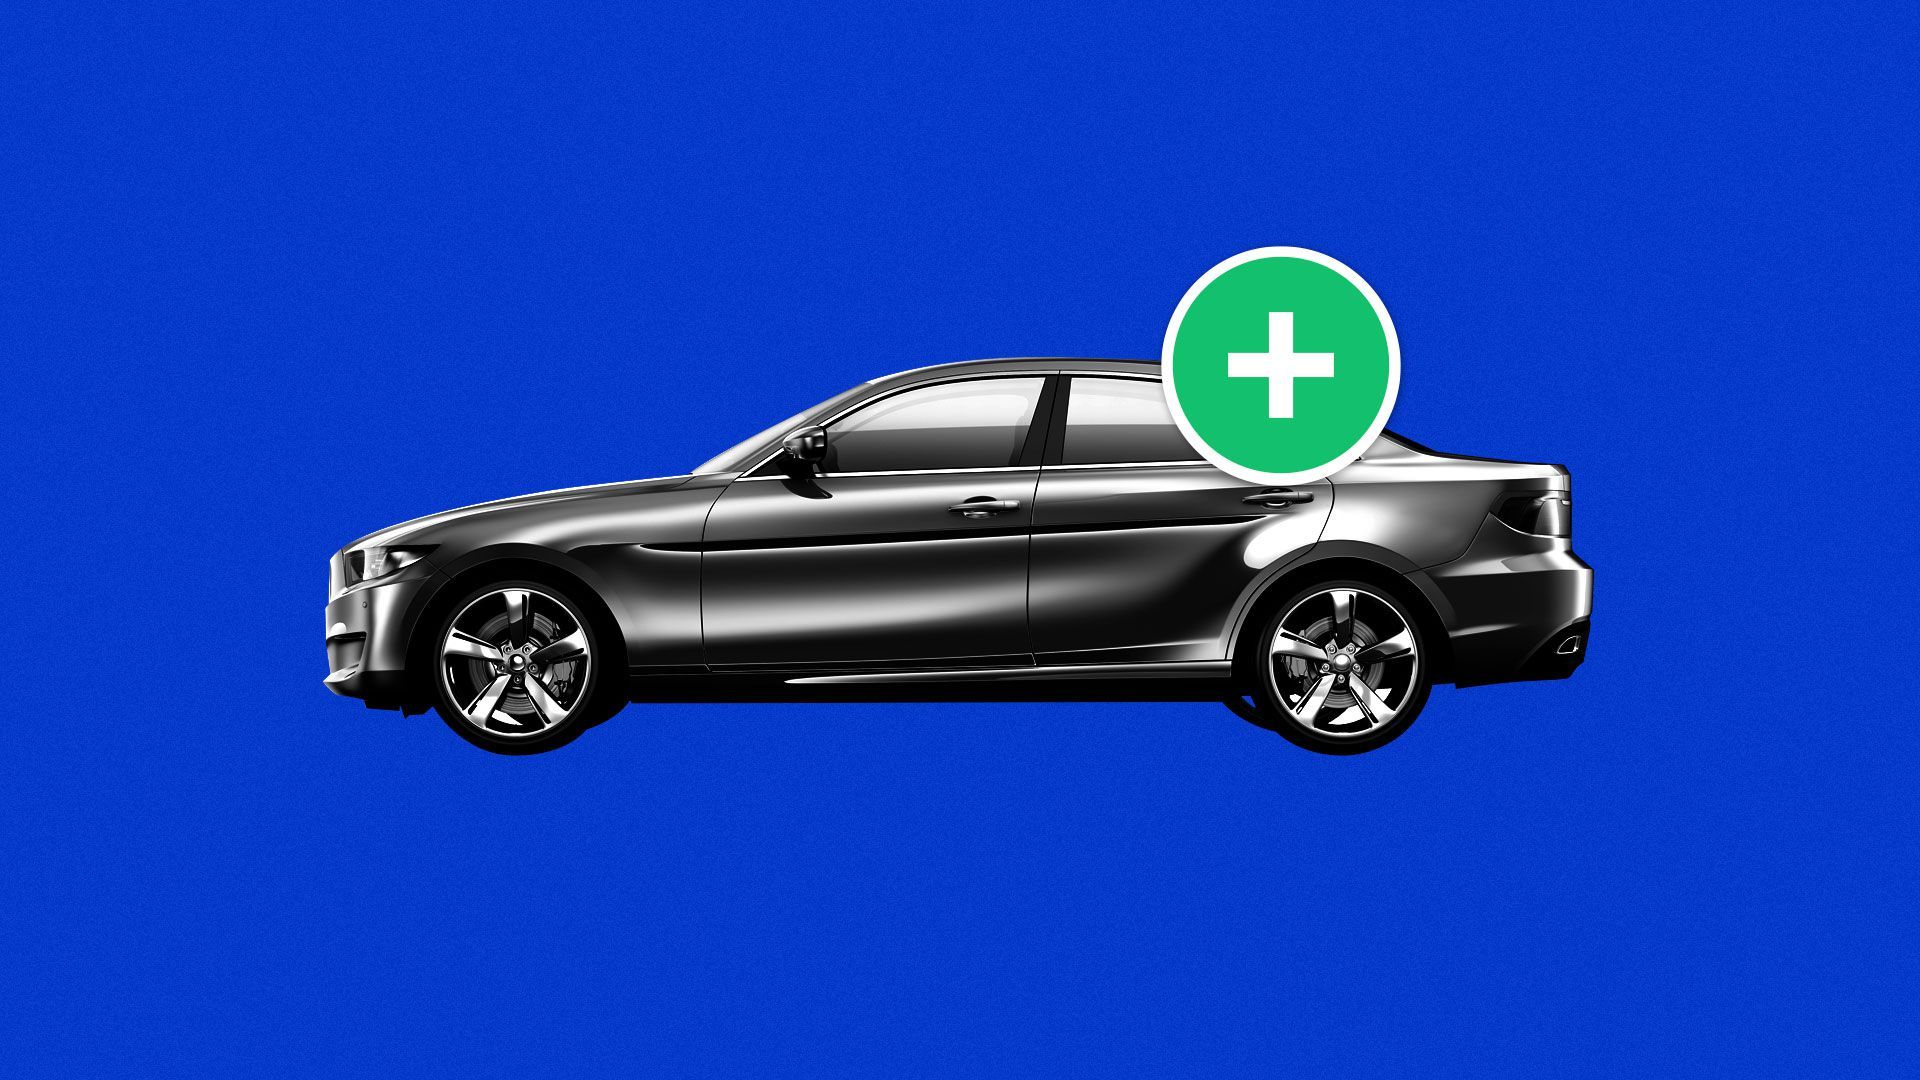 Illustration of car with “add to cart” icon